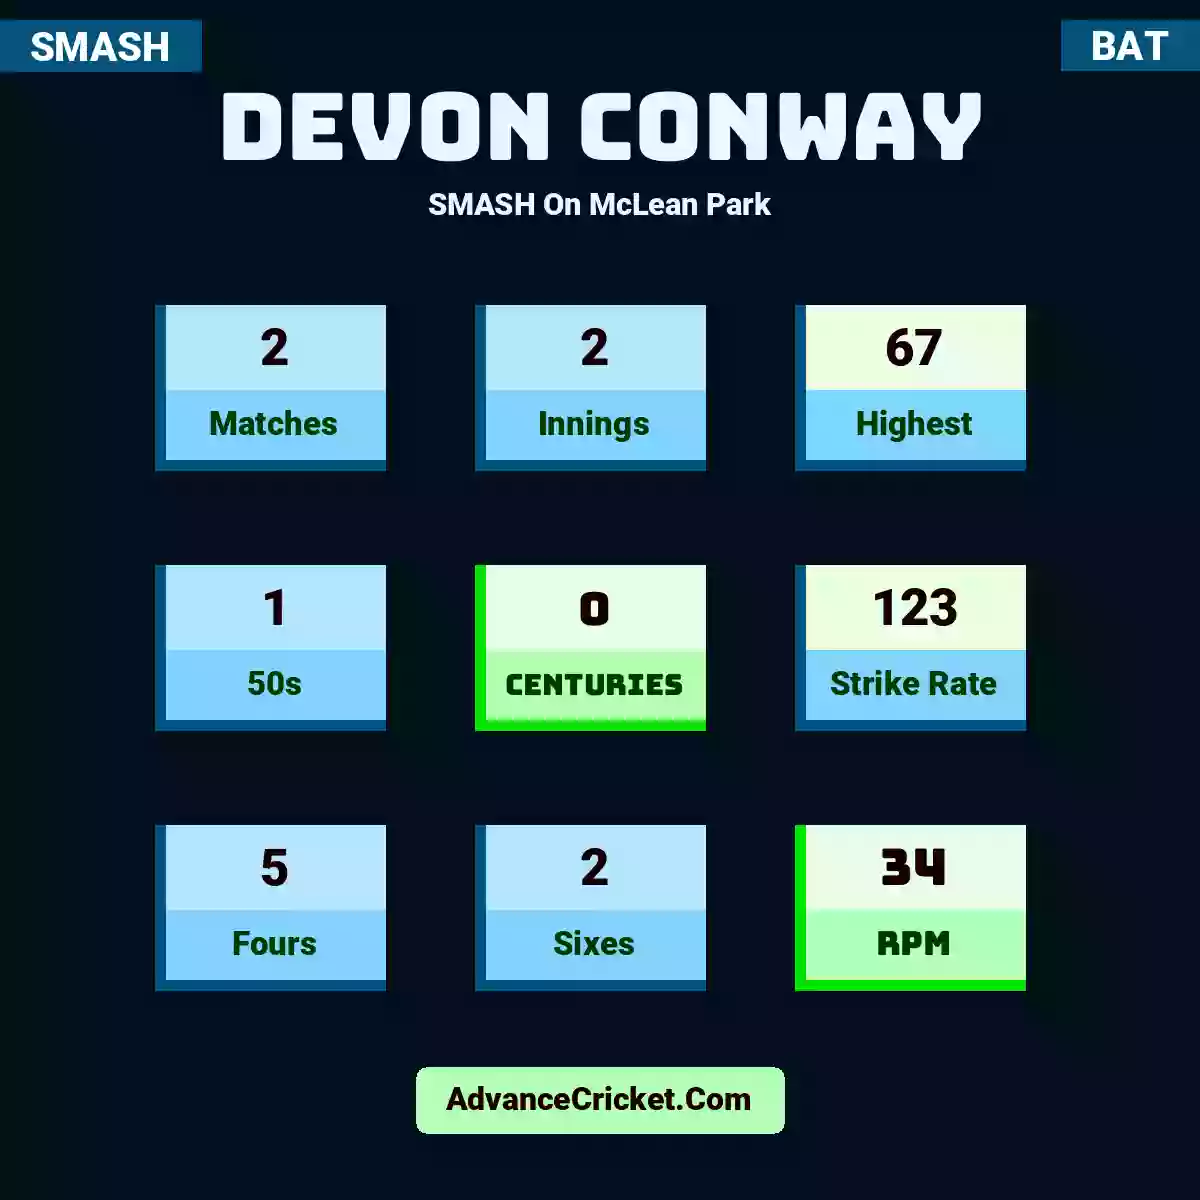 Devon Conway SMASH  On McLean Park, Devon Conway played 2 matches, scored 67 runs as highest, 1 half-centuries, and 0 centuries, with a strike rate of 123. D.Conway hit 5 fours and 2 sixes, with an RPM of 34.